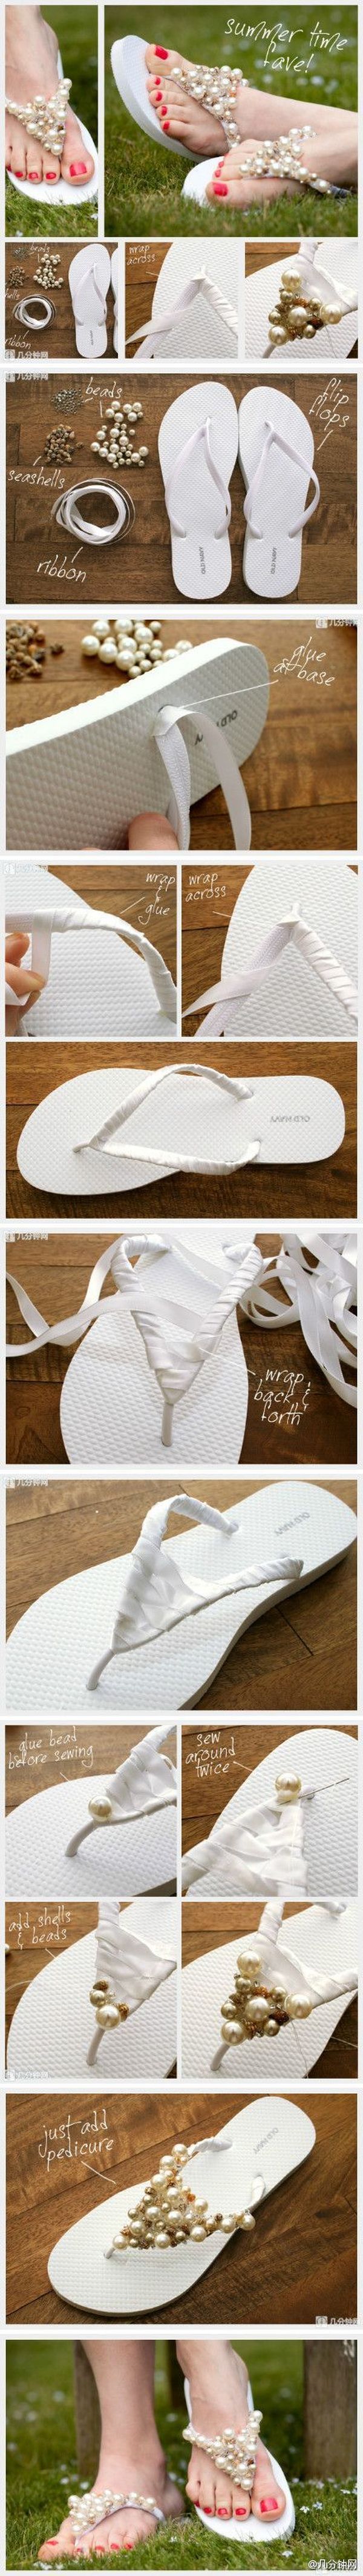 customize flip flops with pearls